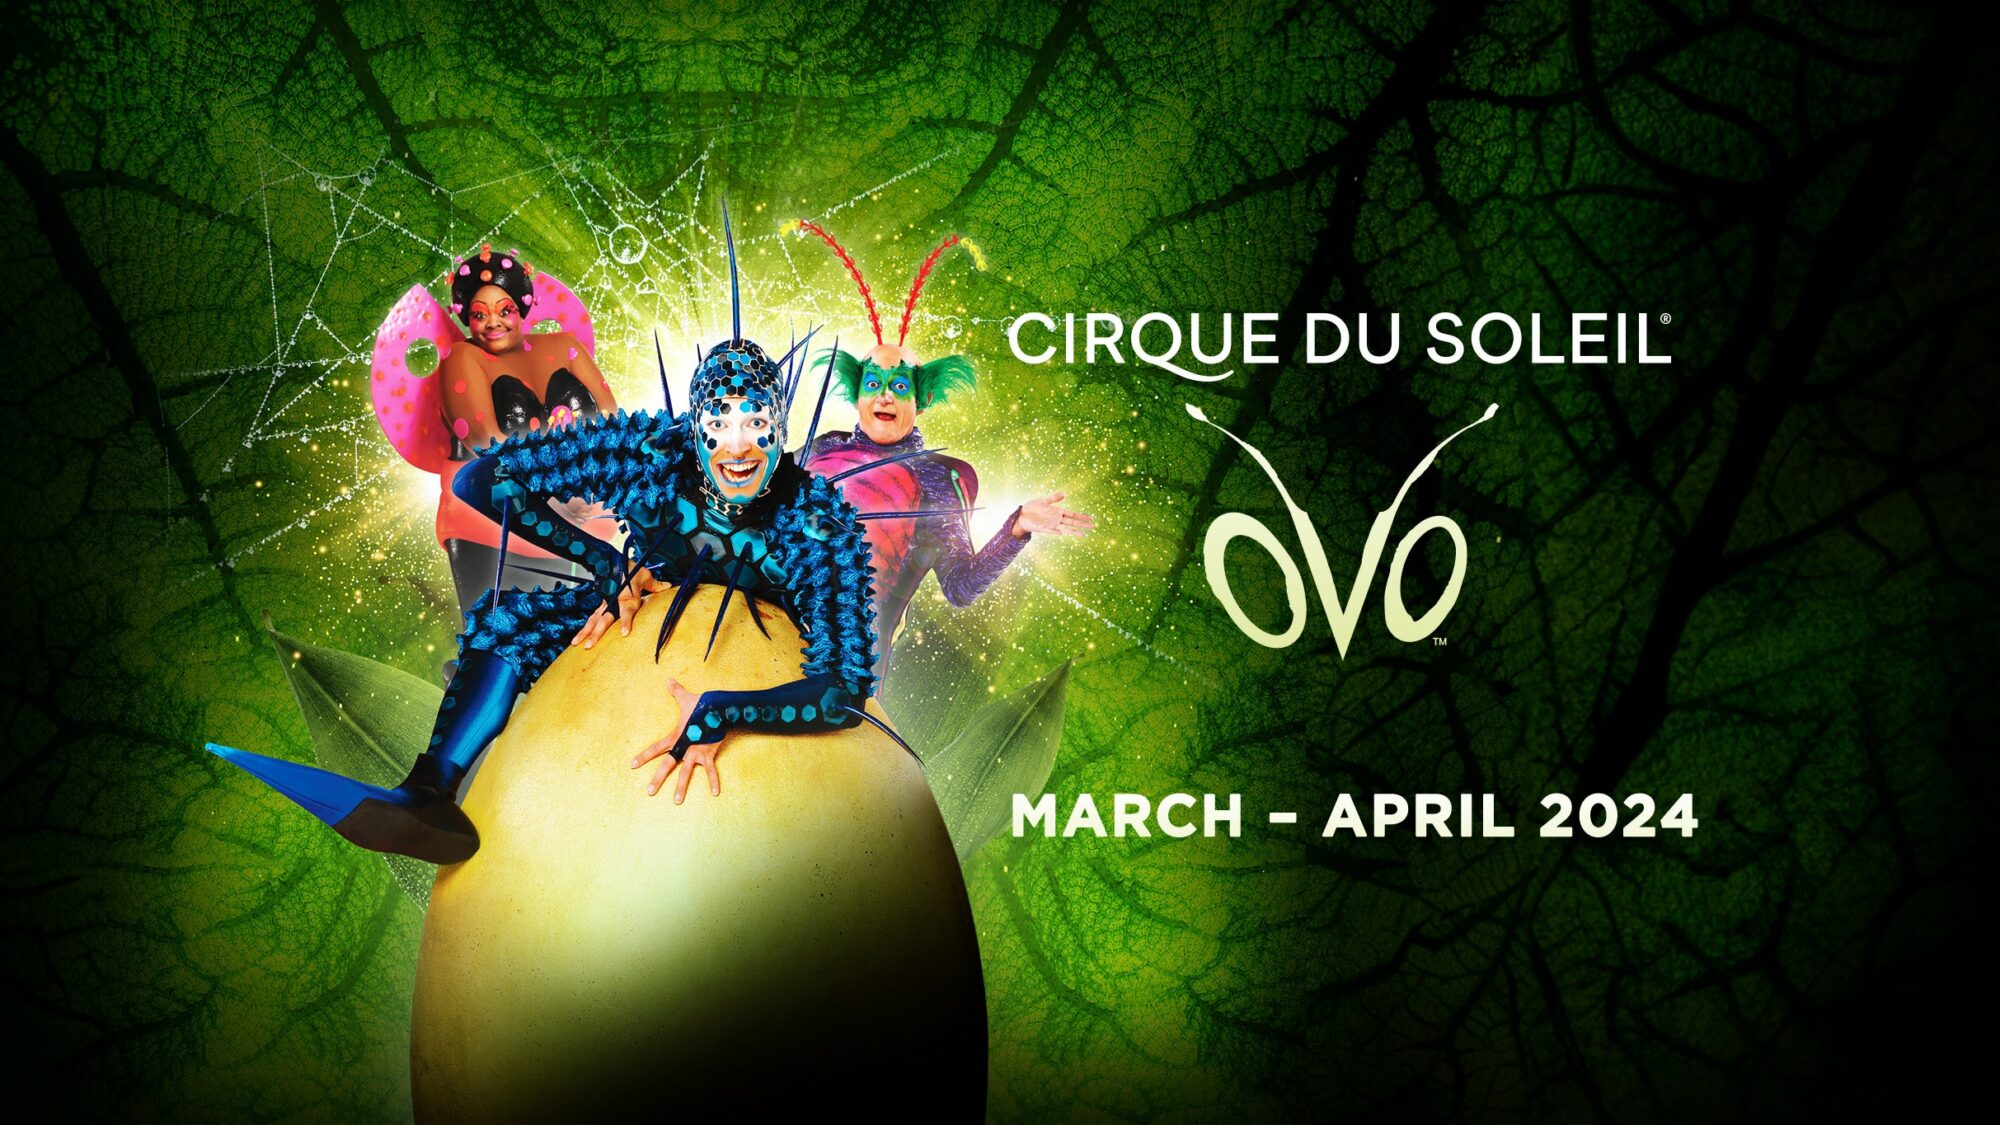 Image name Cirque Du Soleil Ovo at First Direct Arena Leeds the 20 image from the post Cirque Du Soleil : Ovo at First Direct Arena, Leeds in Yorkshire.com.